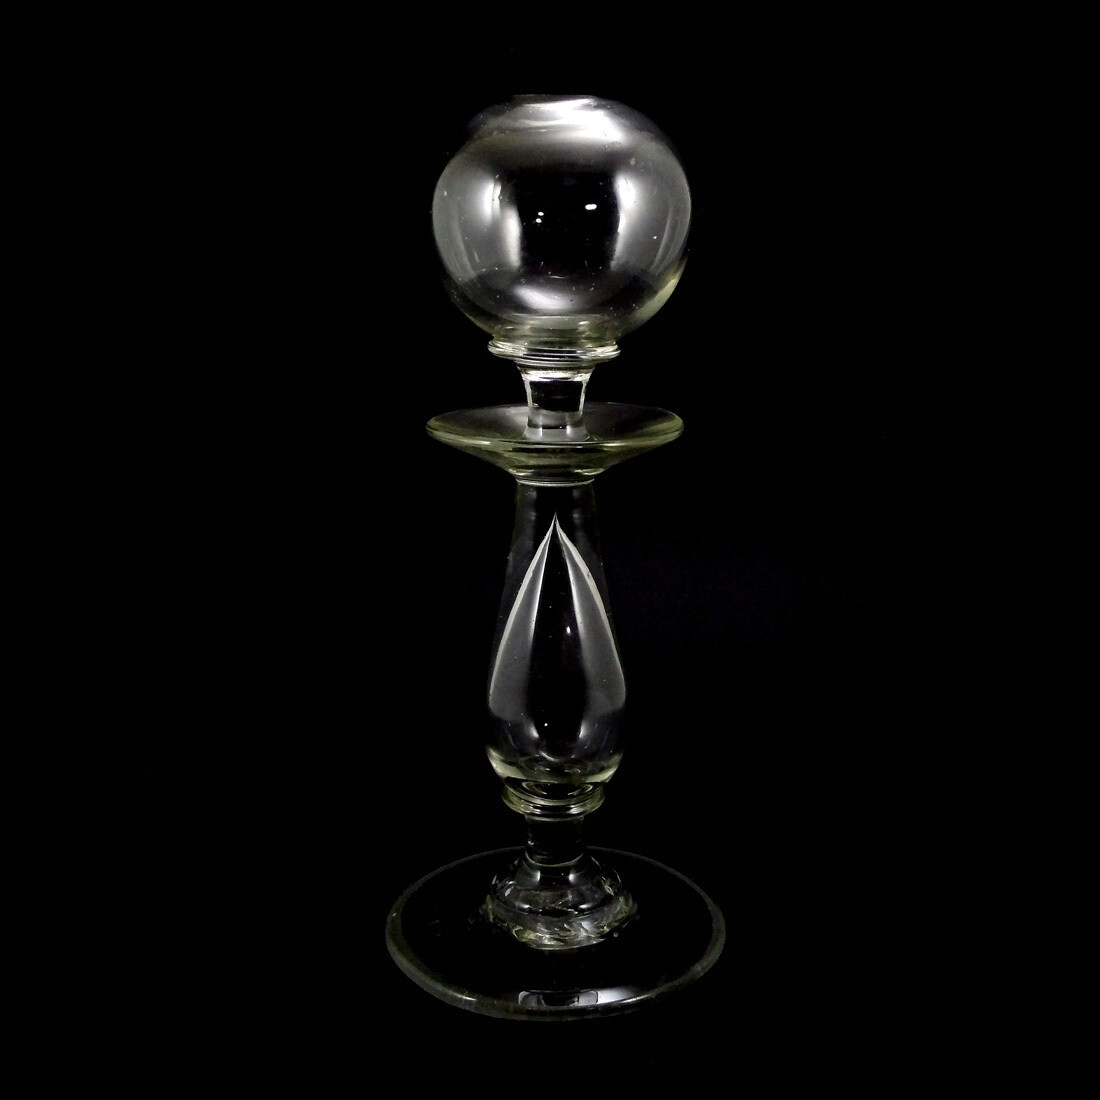 Oil lamp made of colorless glass with hollow baluster shaft, 19th century.